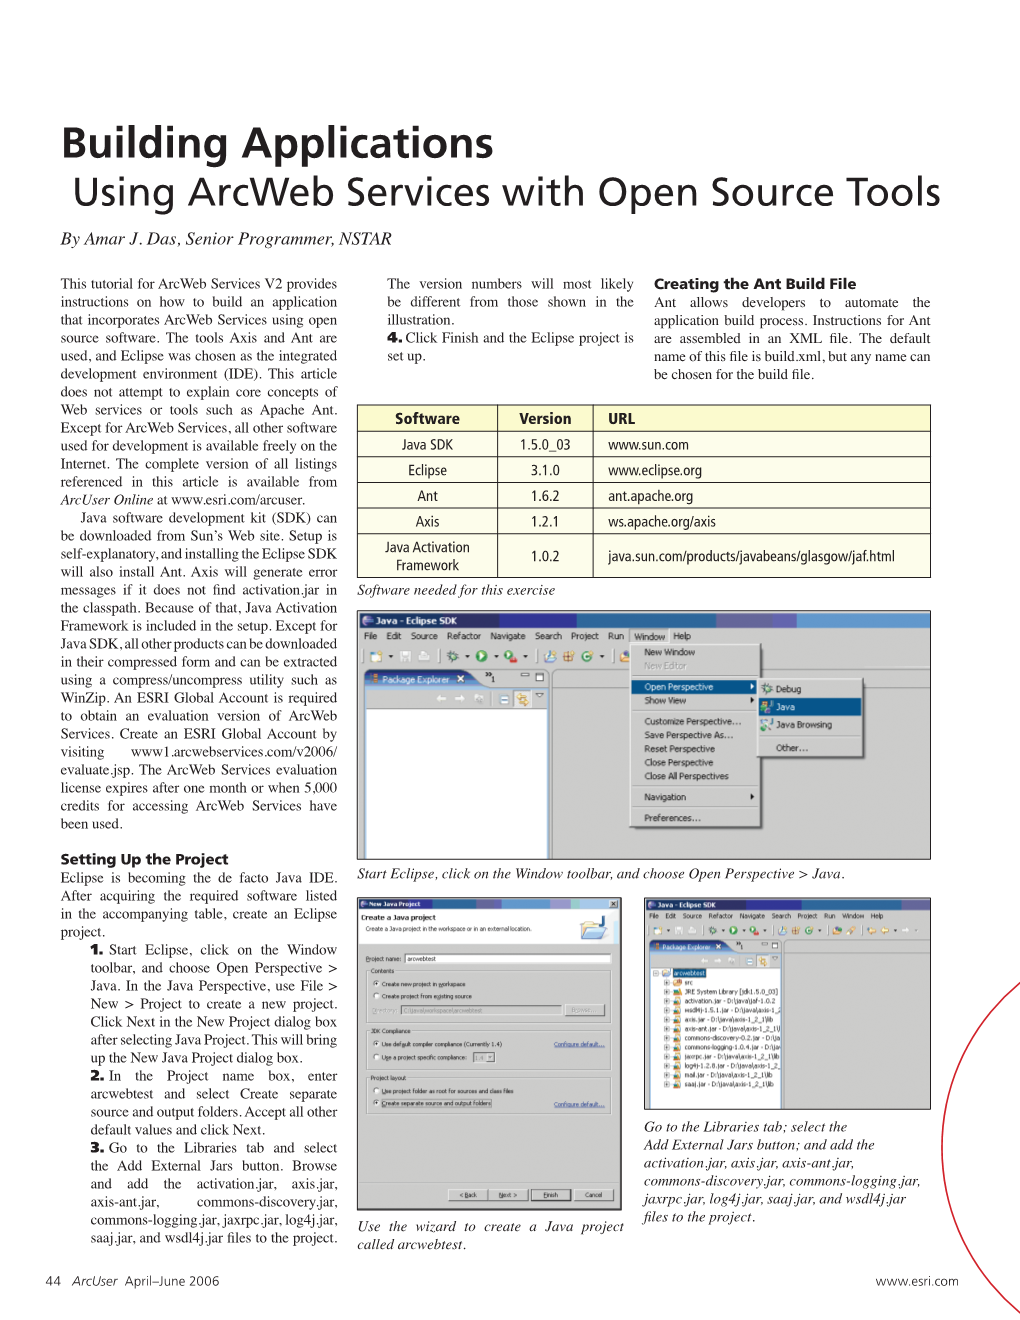 Building Applications Using Arcweb Services with Open Source Tools by Amar J